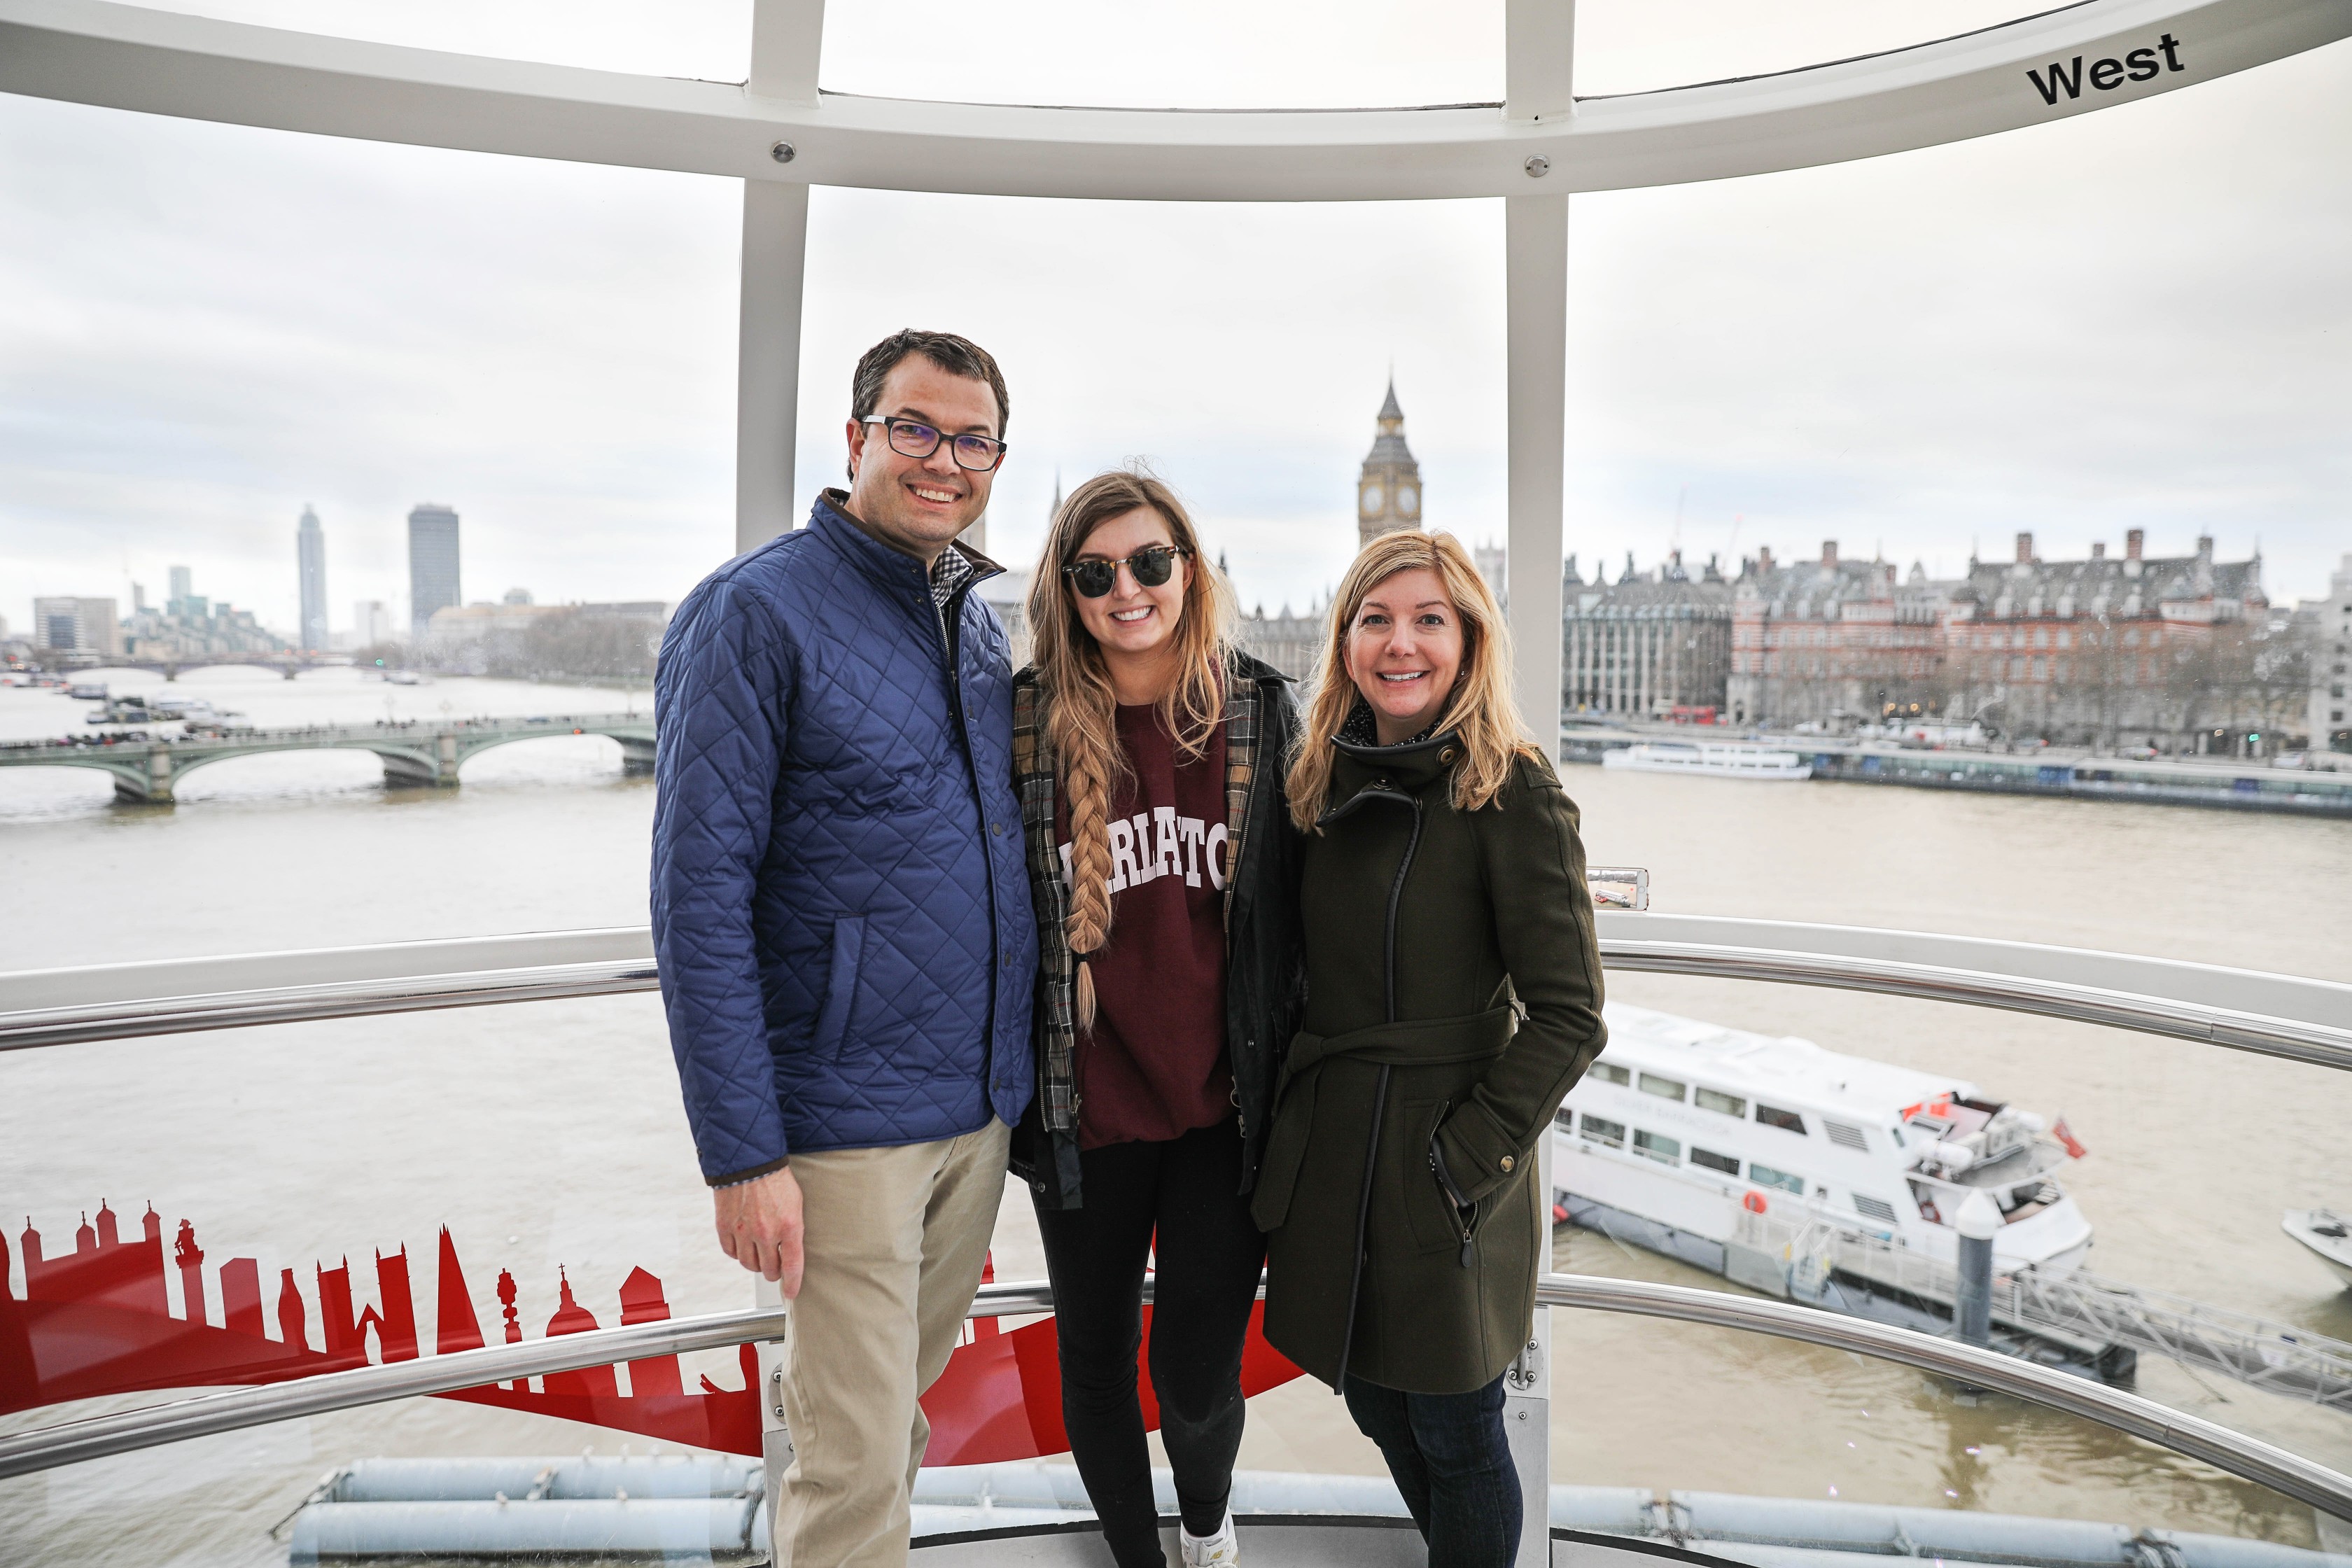 London Adventure post! Photos from the London Eye! Wearing a Barbour coat and England crewneck with my favorite gold sneakers by new balance! By Lauren Lindmark on daily dose of charm dailydoseofcharm.com